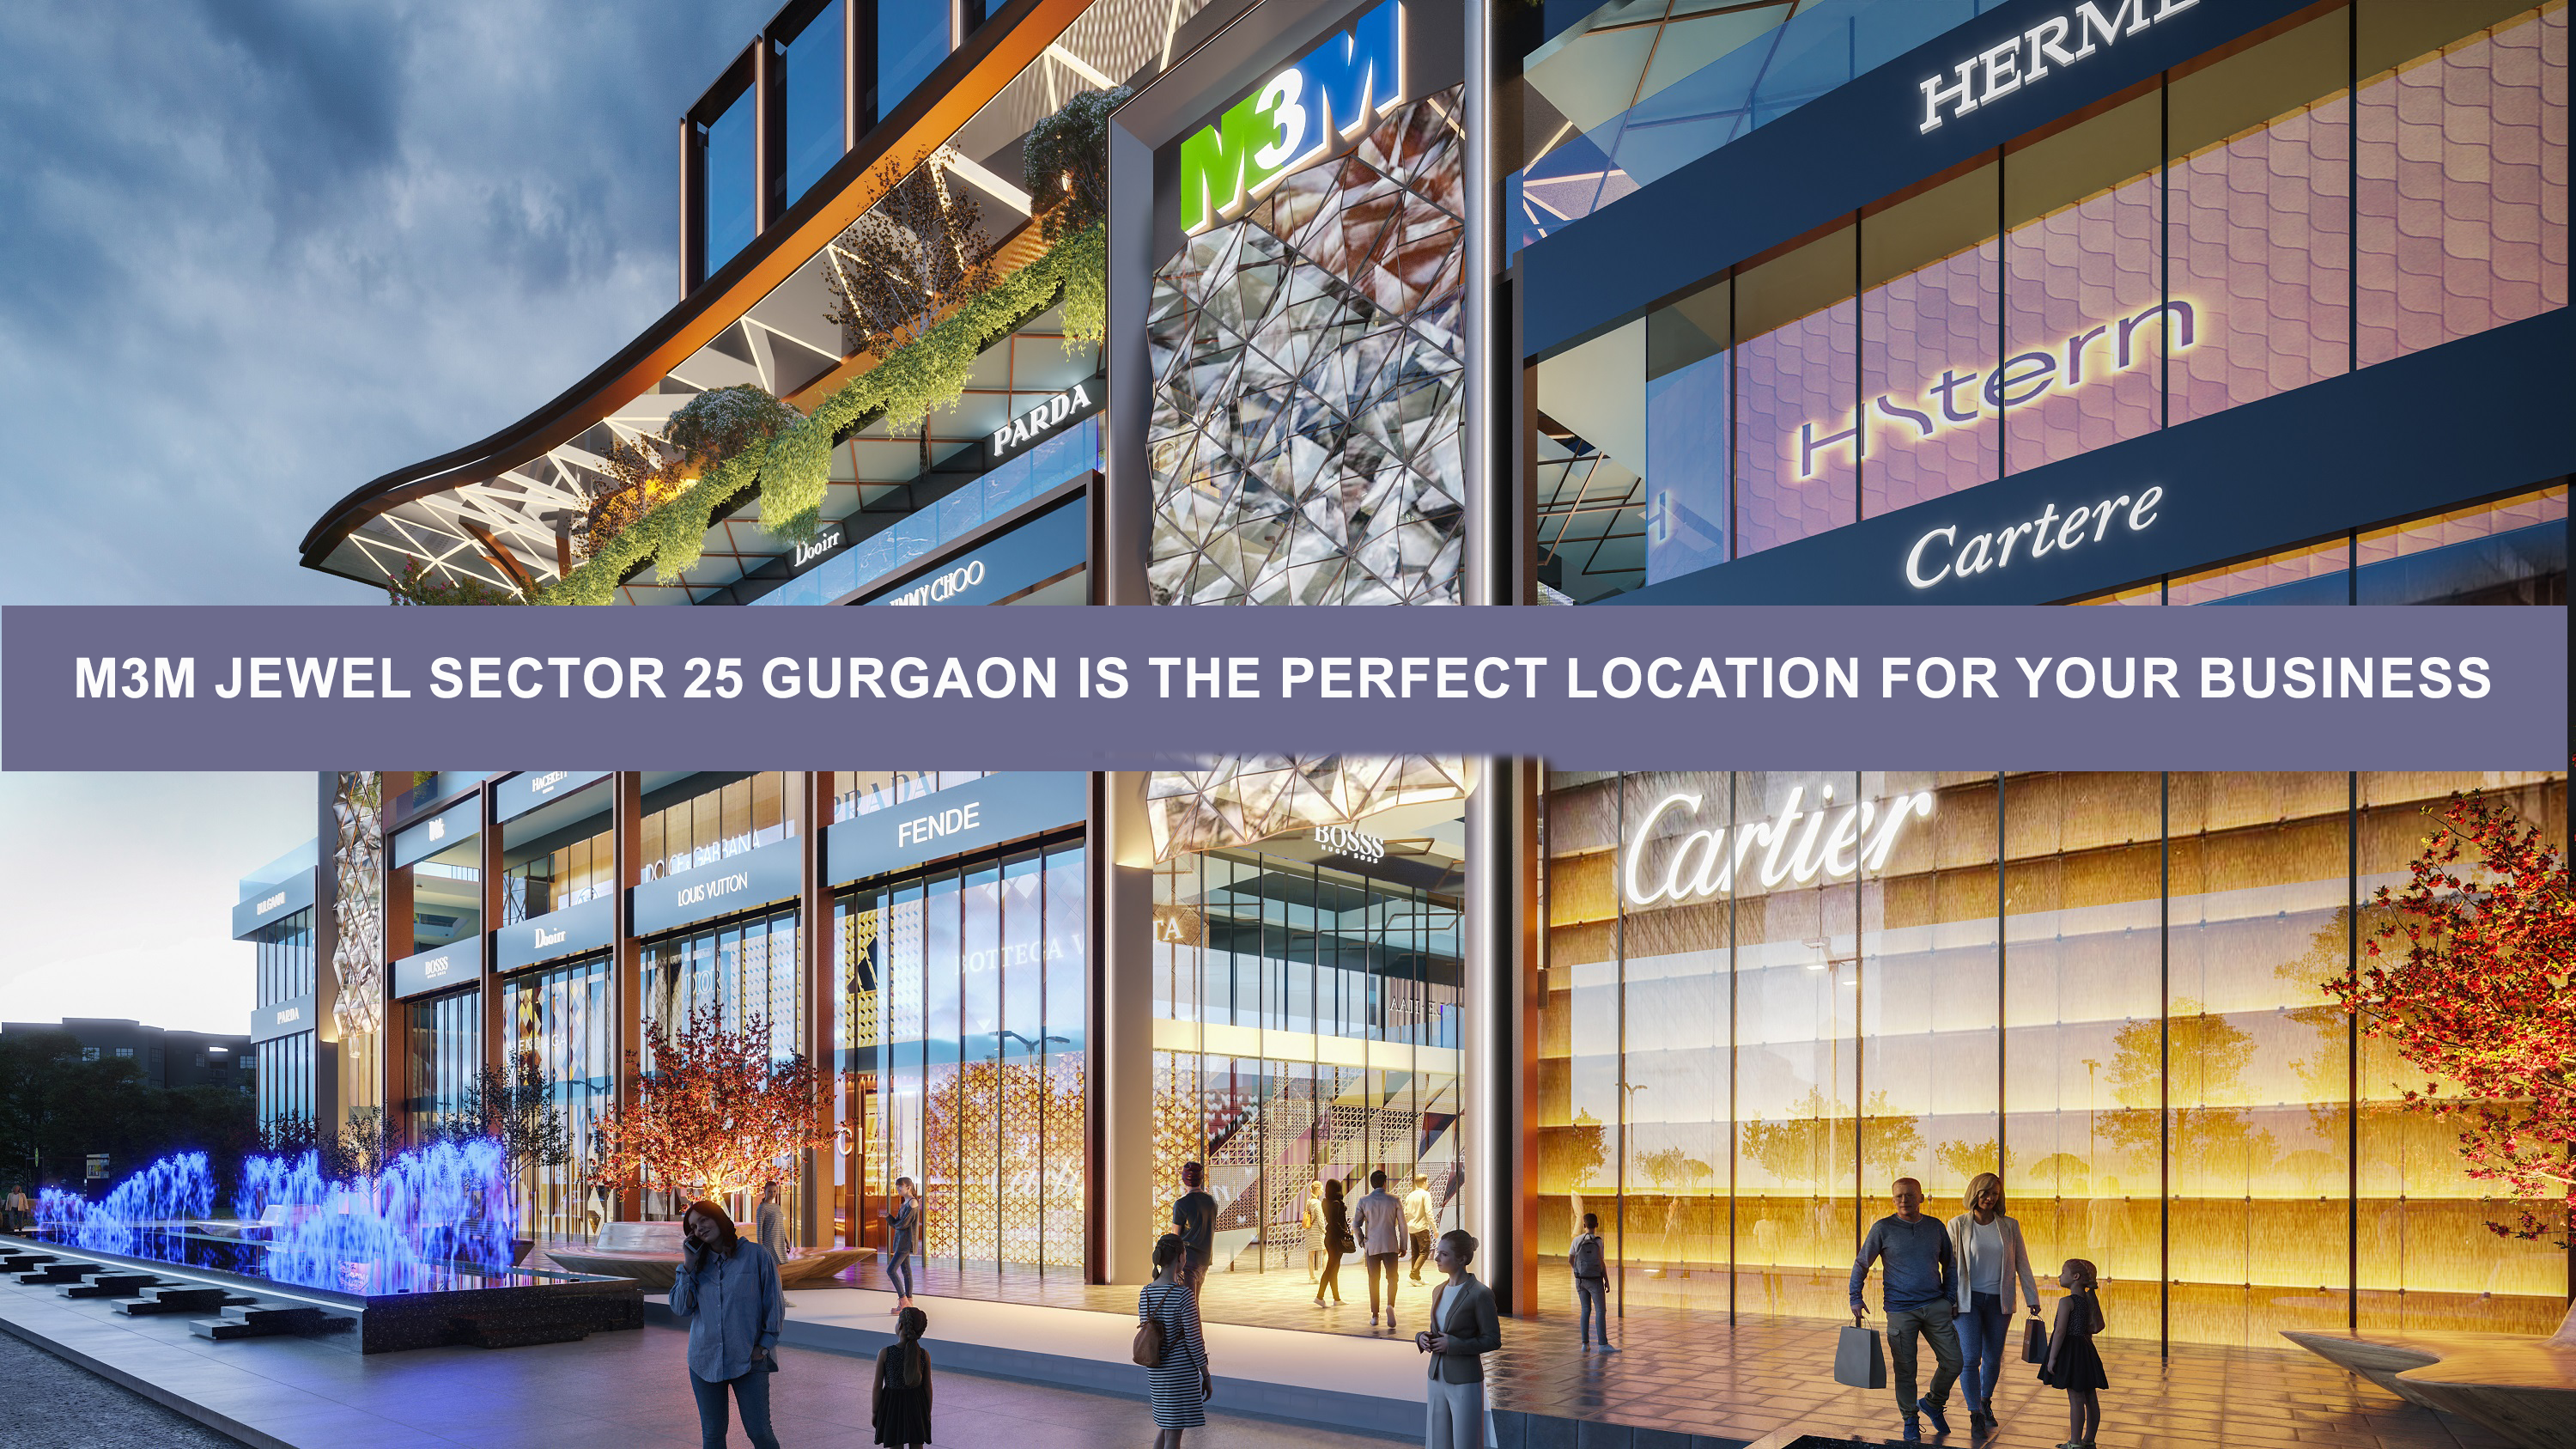 M3M Jewel Sector 25 Gurgaon is the Perfect Location for Your Business